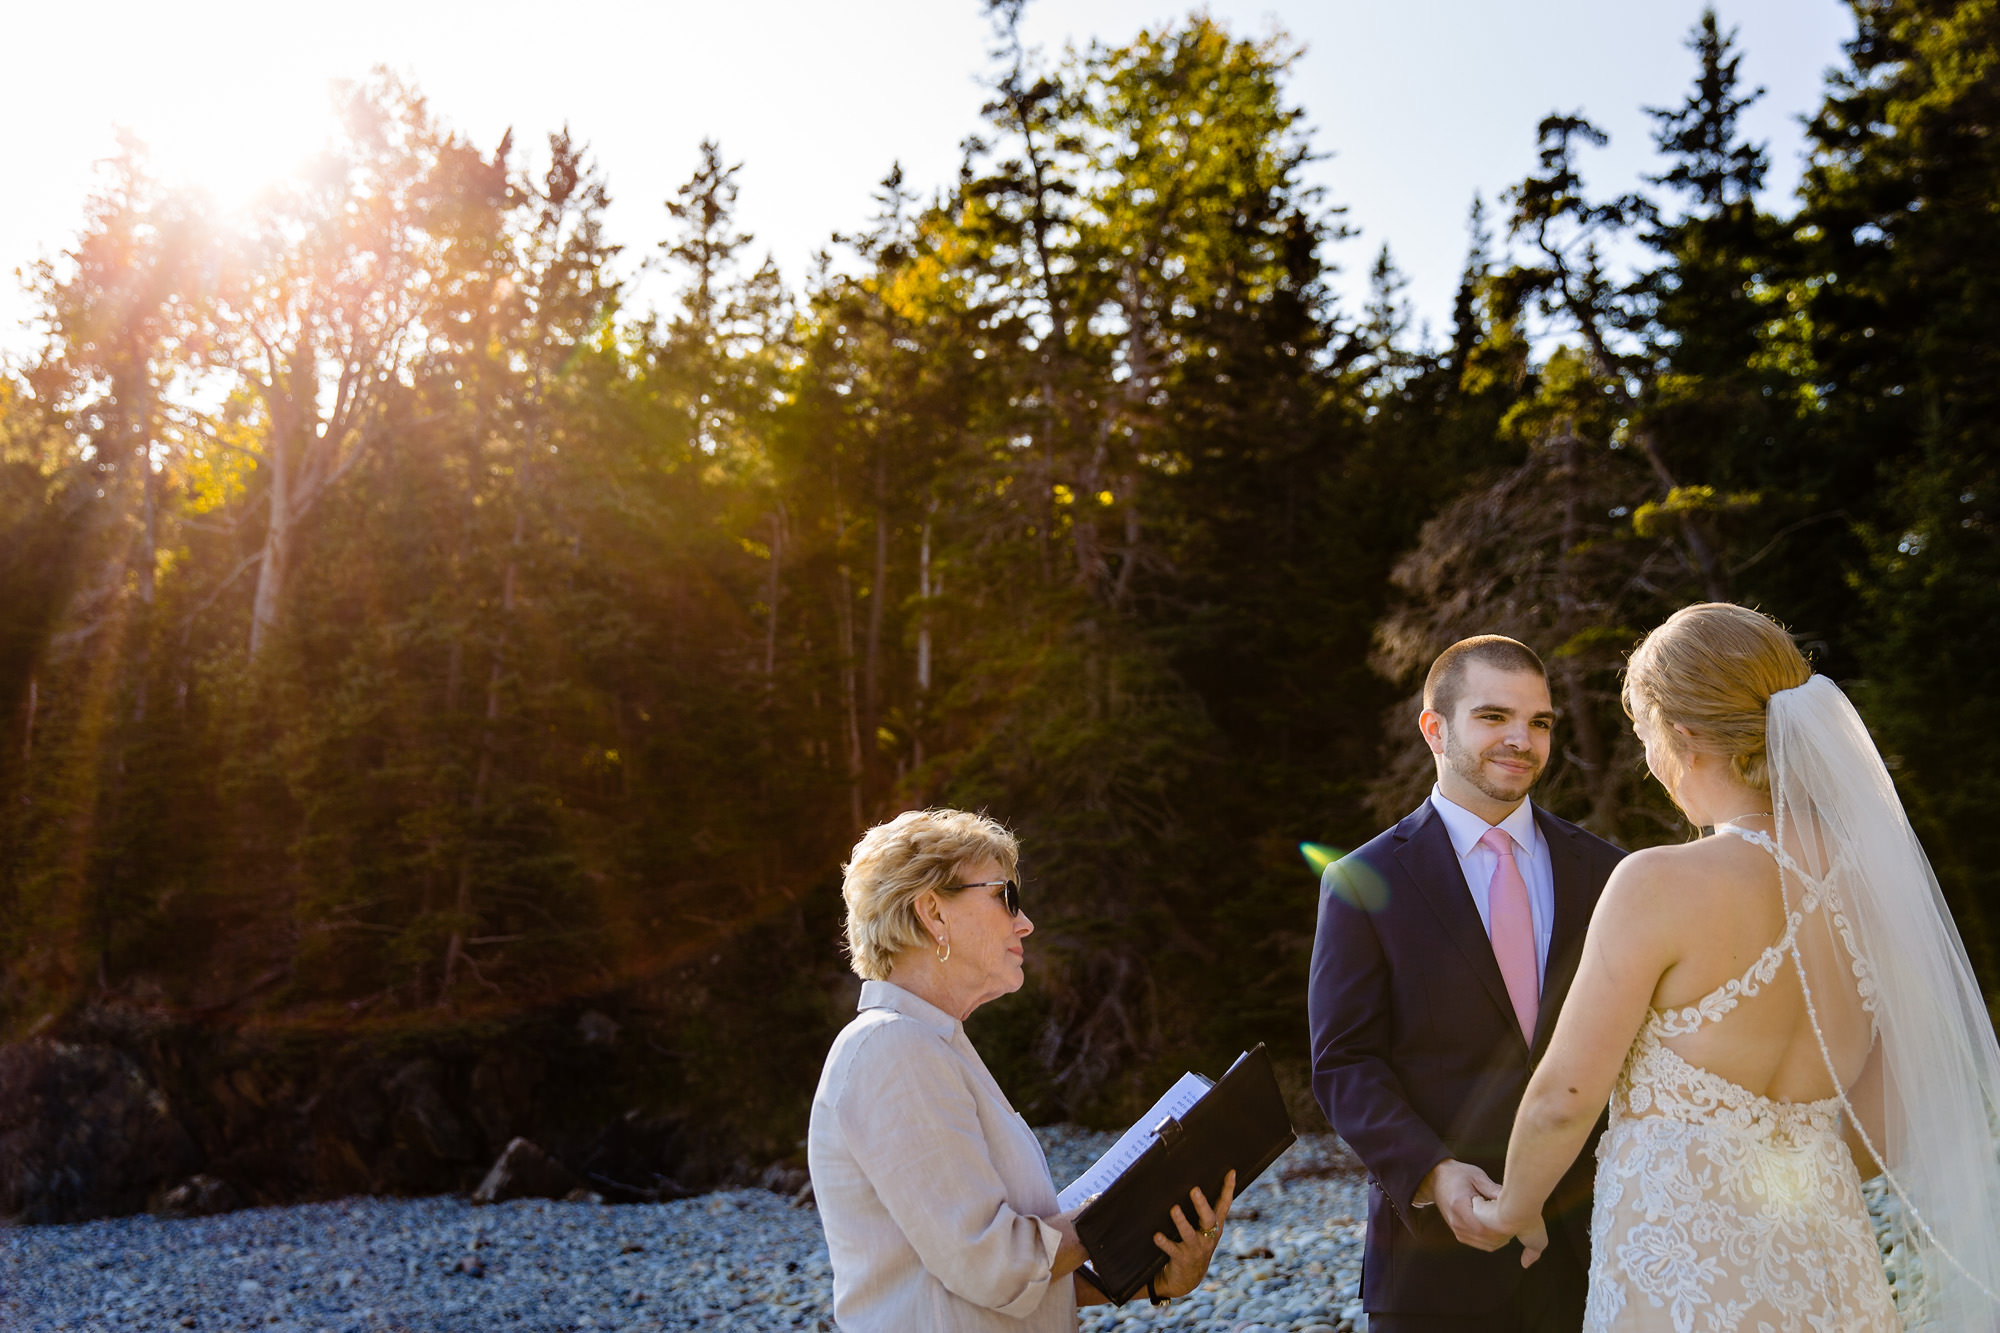 The groom looks at his bride during their wedding ceremony at Little Hunter's Beach in Acadia